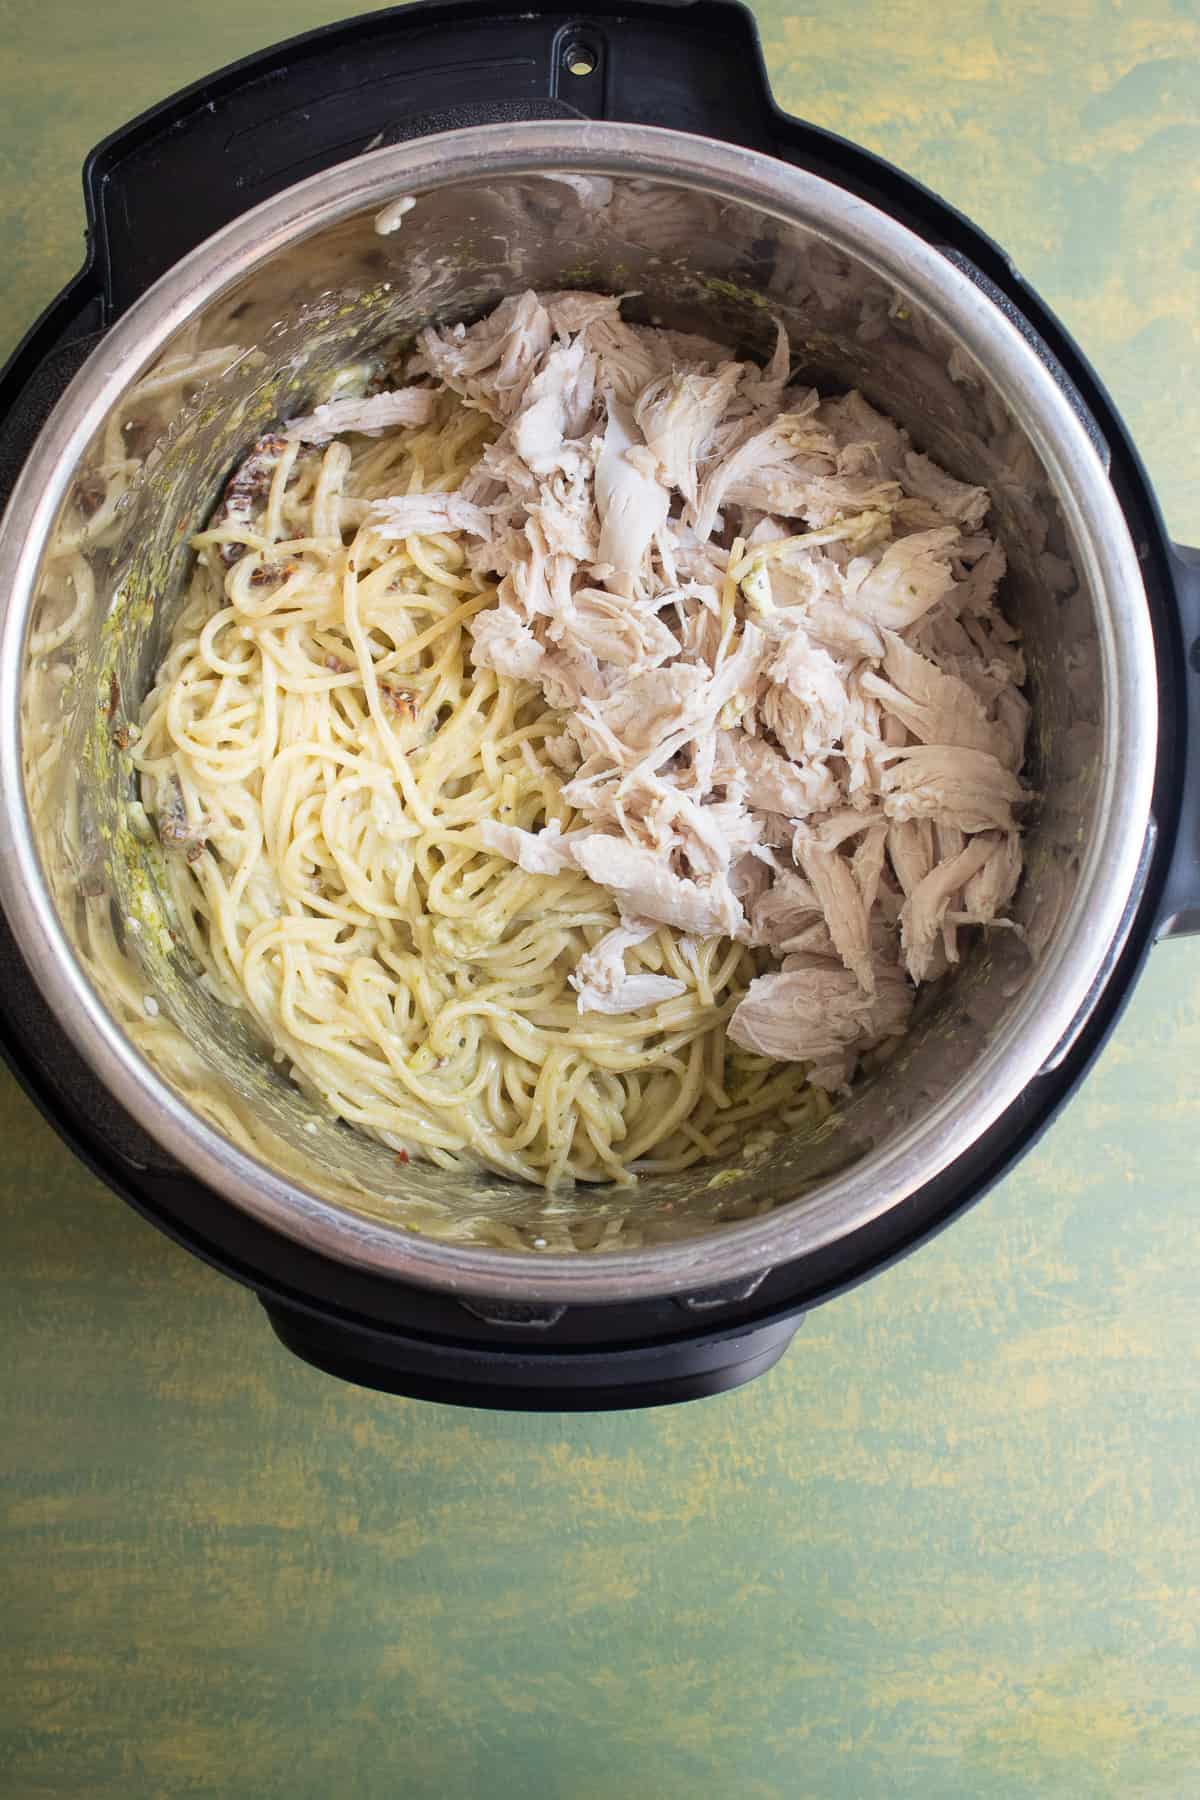 The cooked spaghetti and shredded chicken in the insert of the Instant Pot.